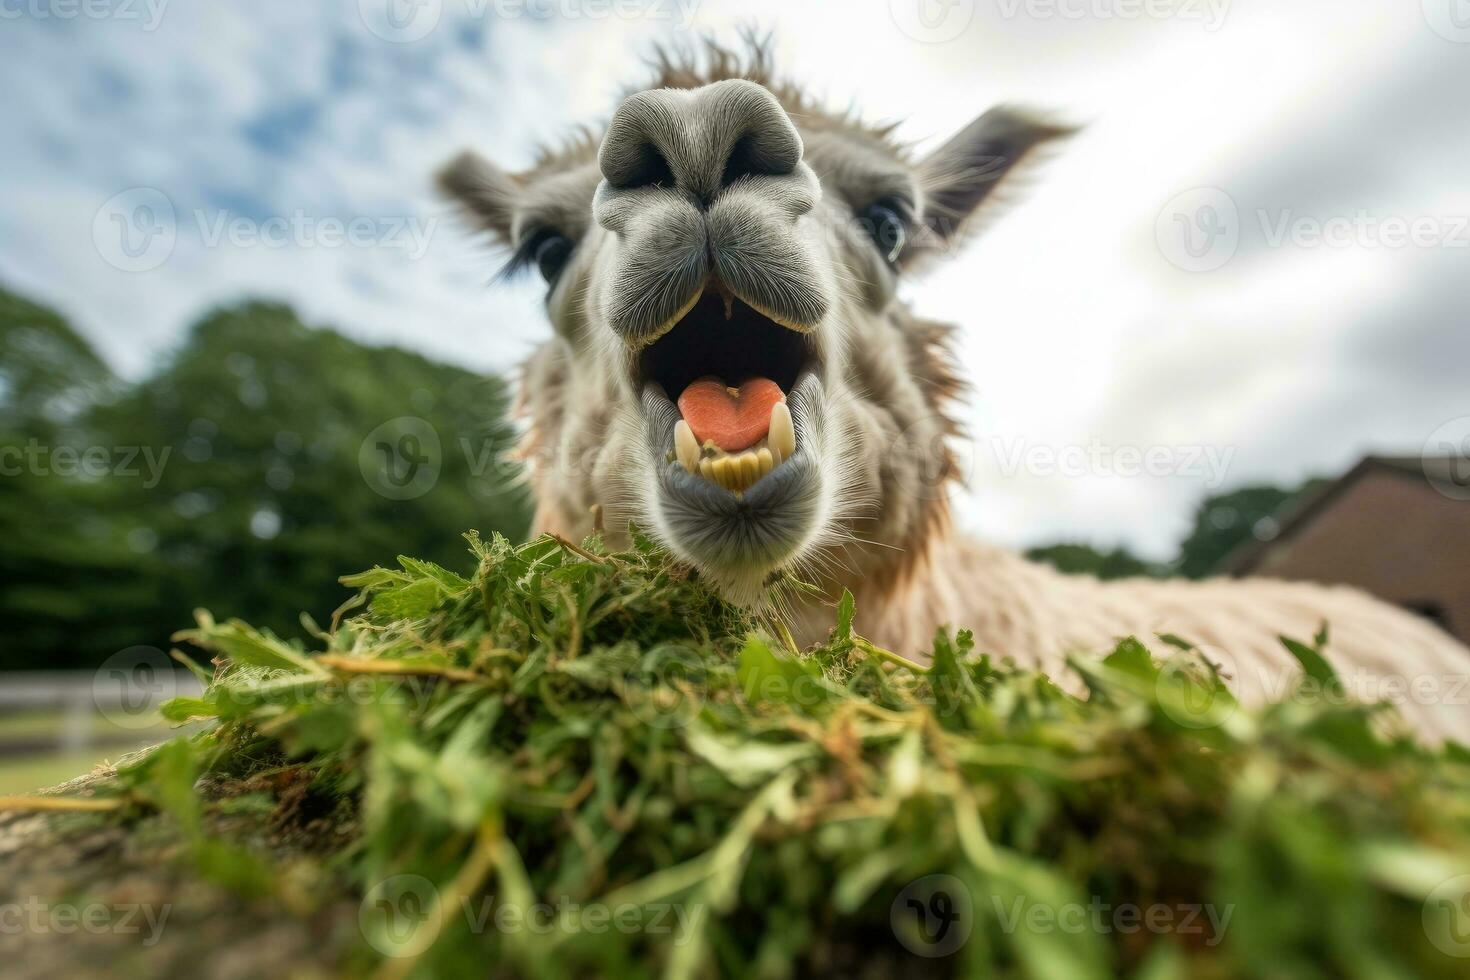 The Silly Side of Farm Life - A Close-Up of an Alpaca's Amusing Facial Expressions - AI generated photo